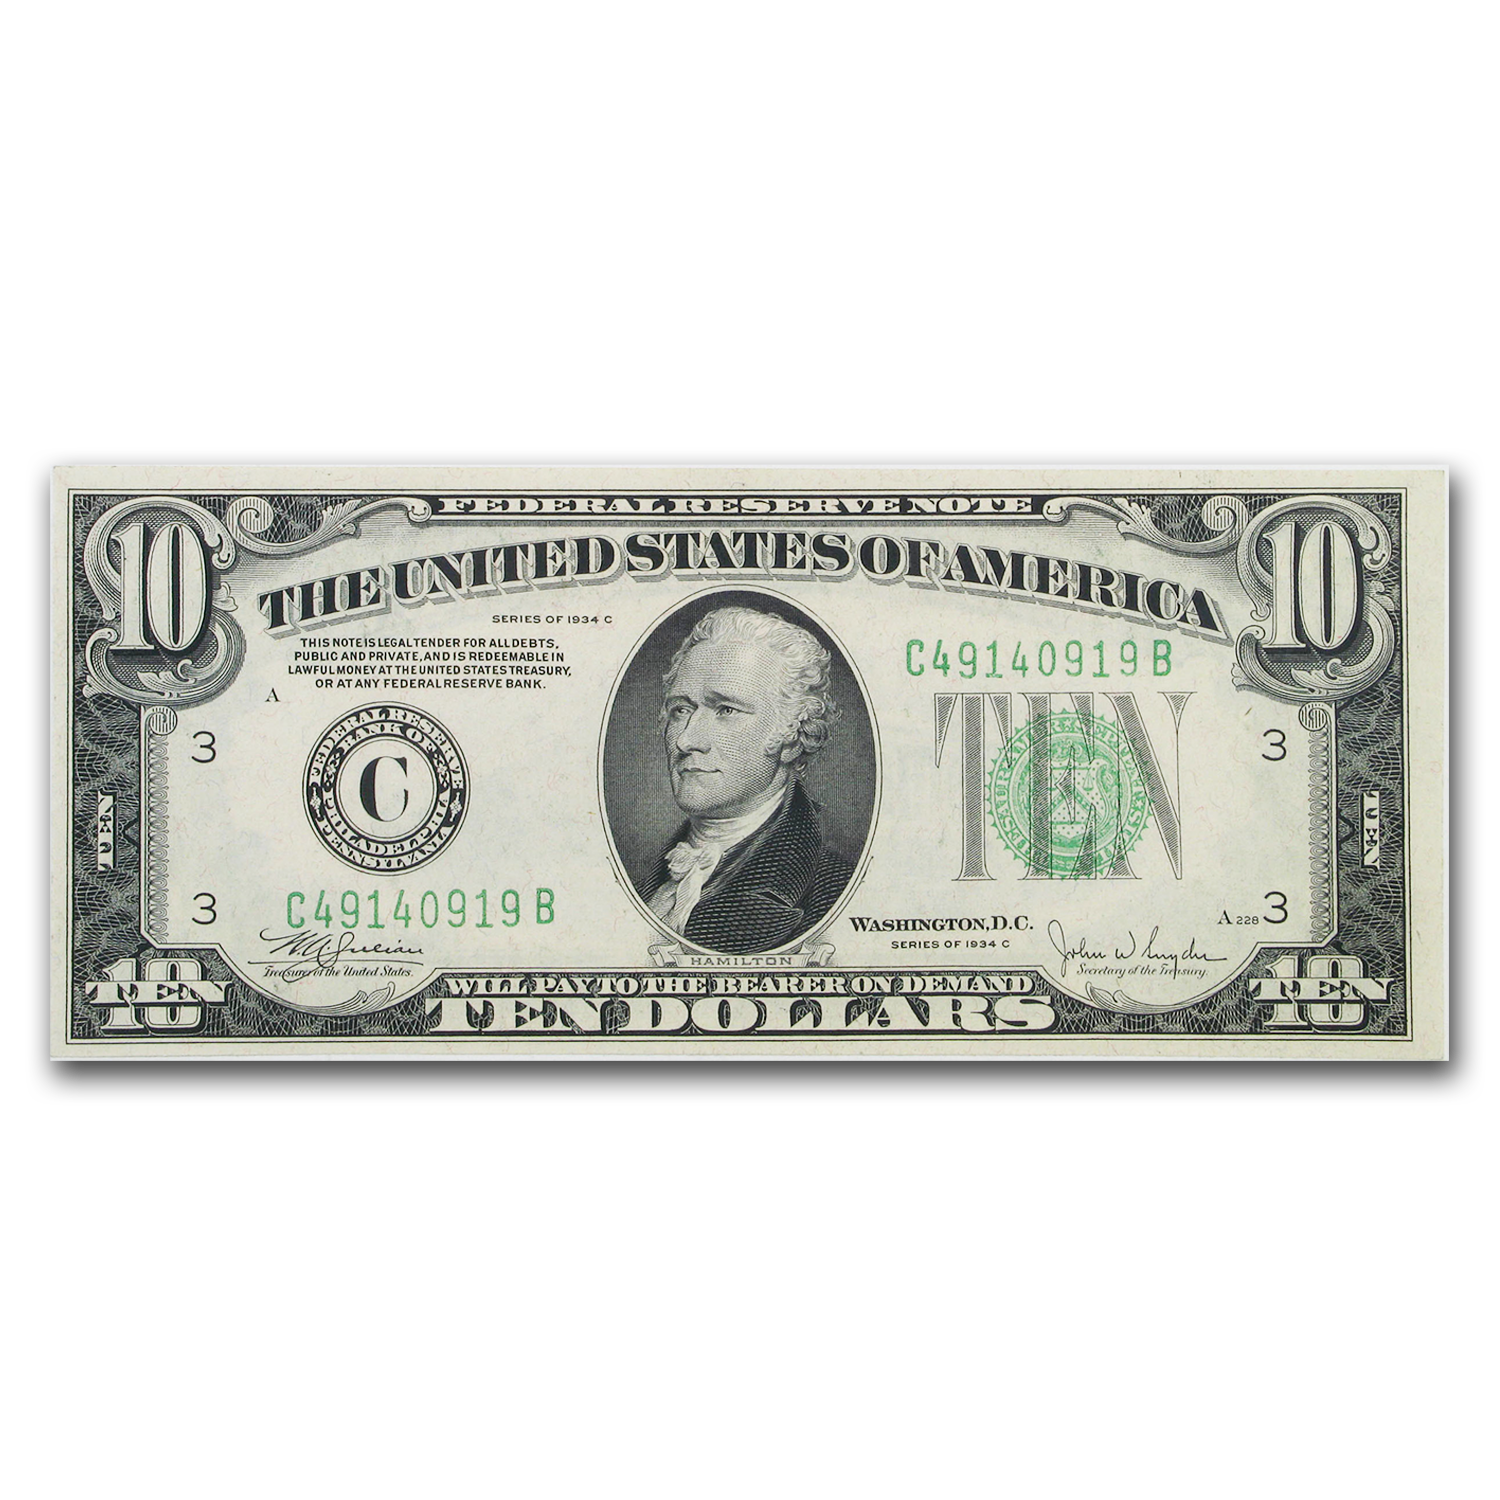 1 $1.00 Series 1993 Federal Reserve Note XF Circulated Condition 